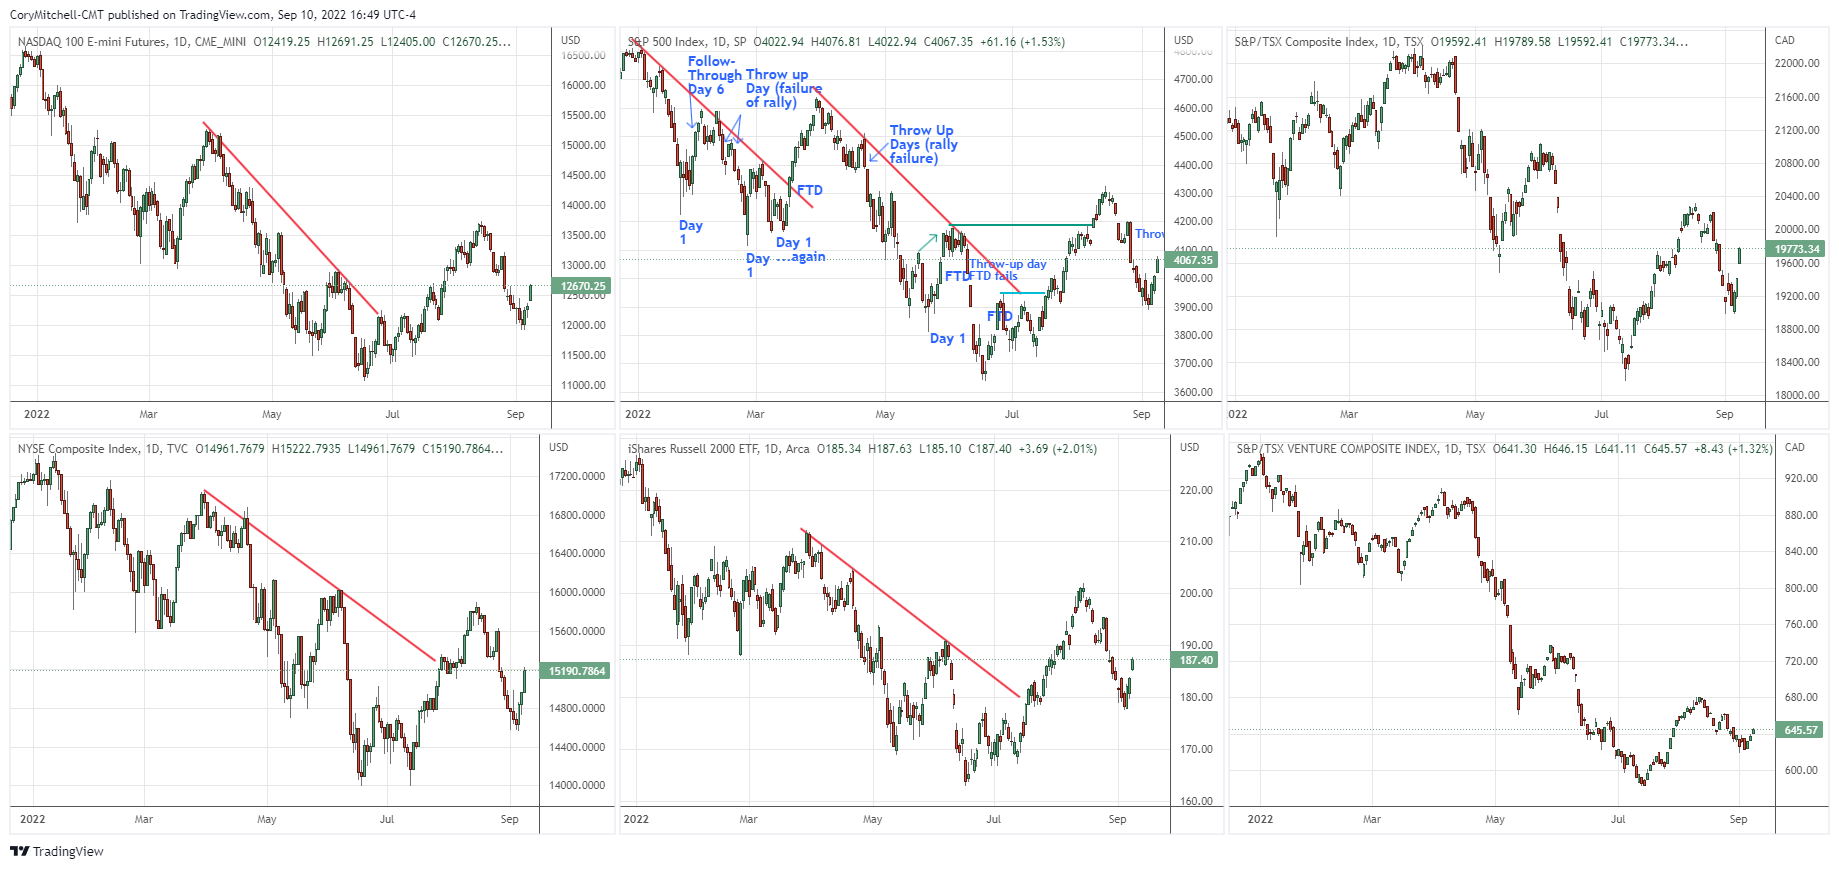 US and Canadian stock indices comparison Sept 10